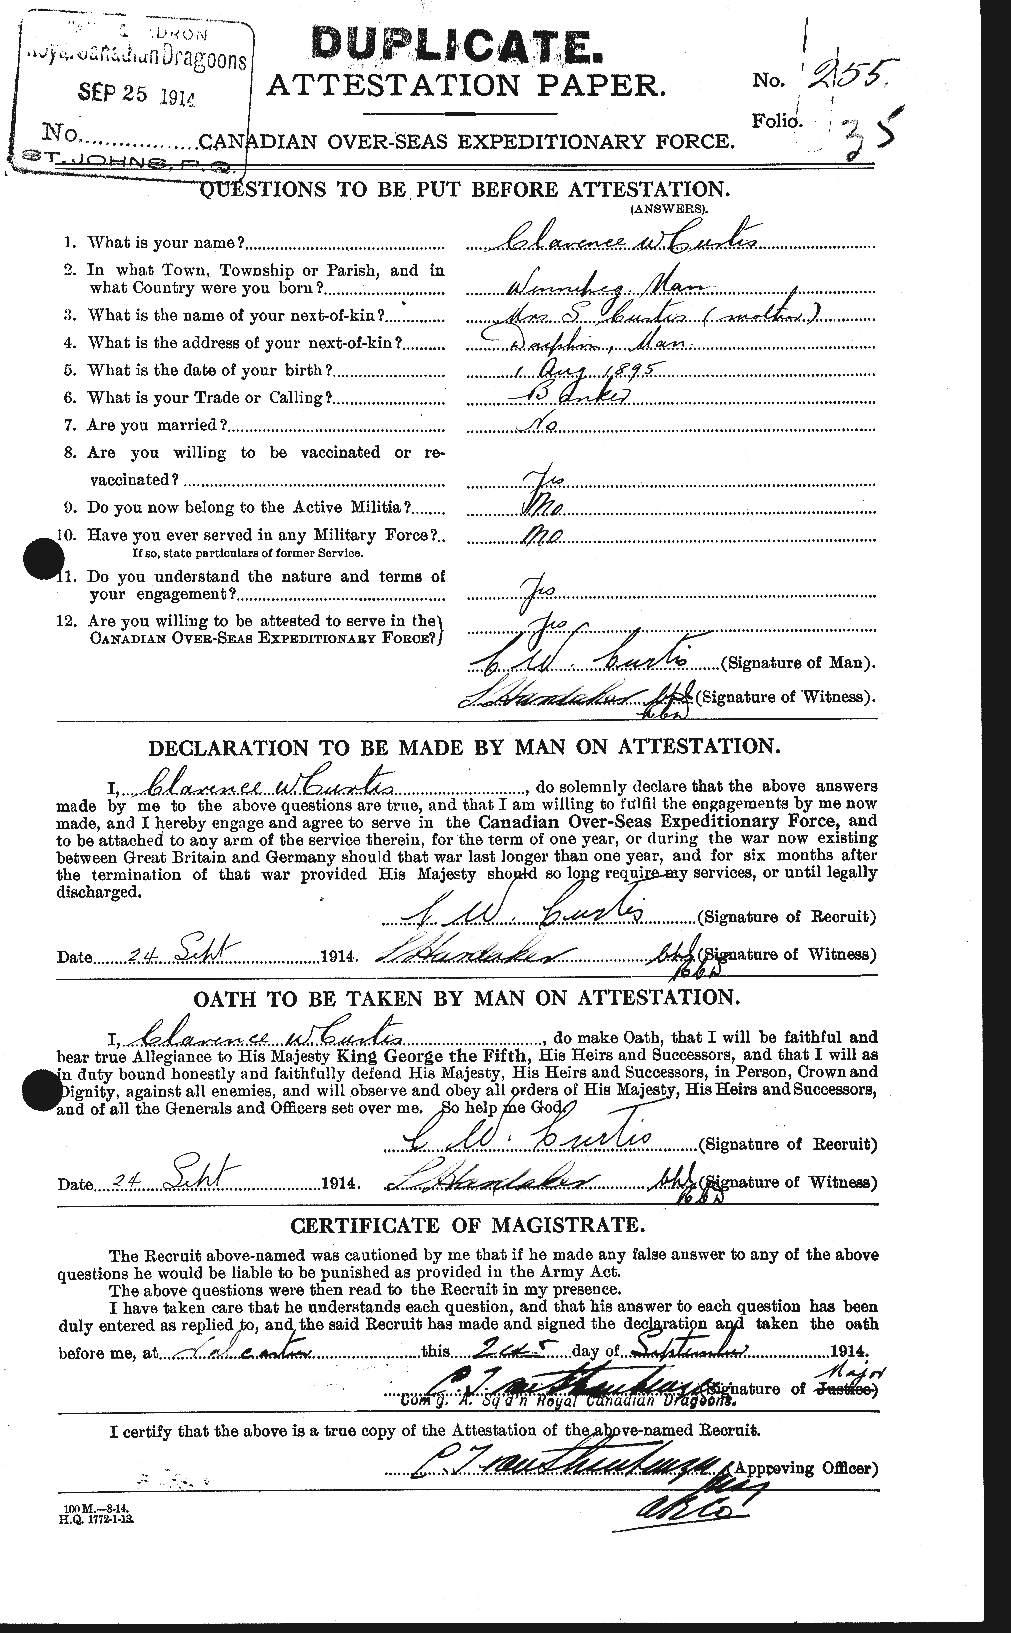 Personnel Records of the First World War - CEF 072580a